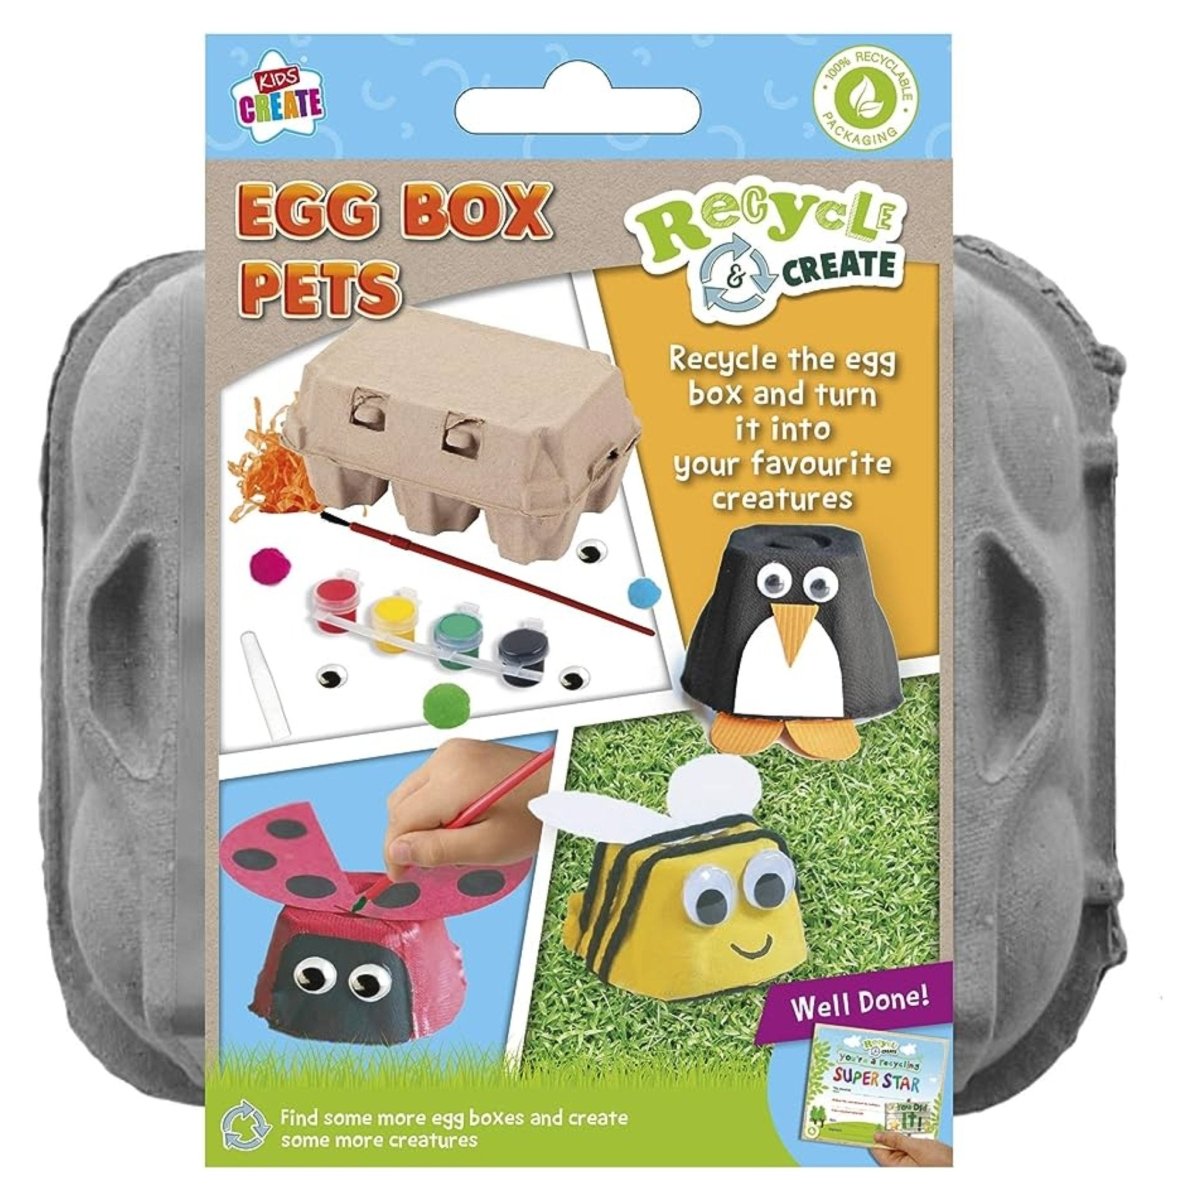 Recycle Egg Box Pets - Kids Party Craft